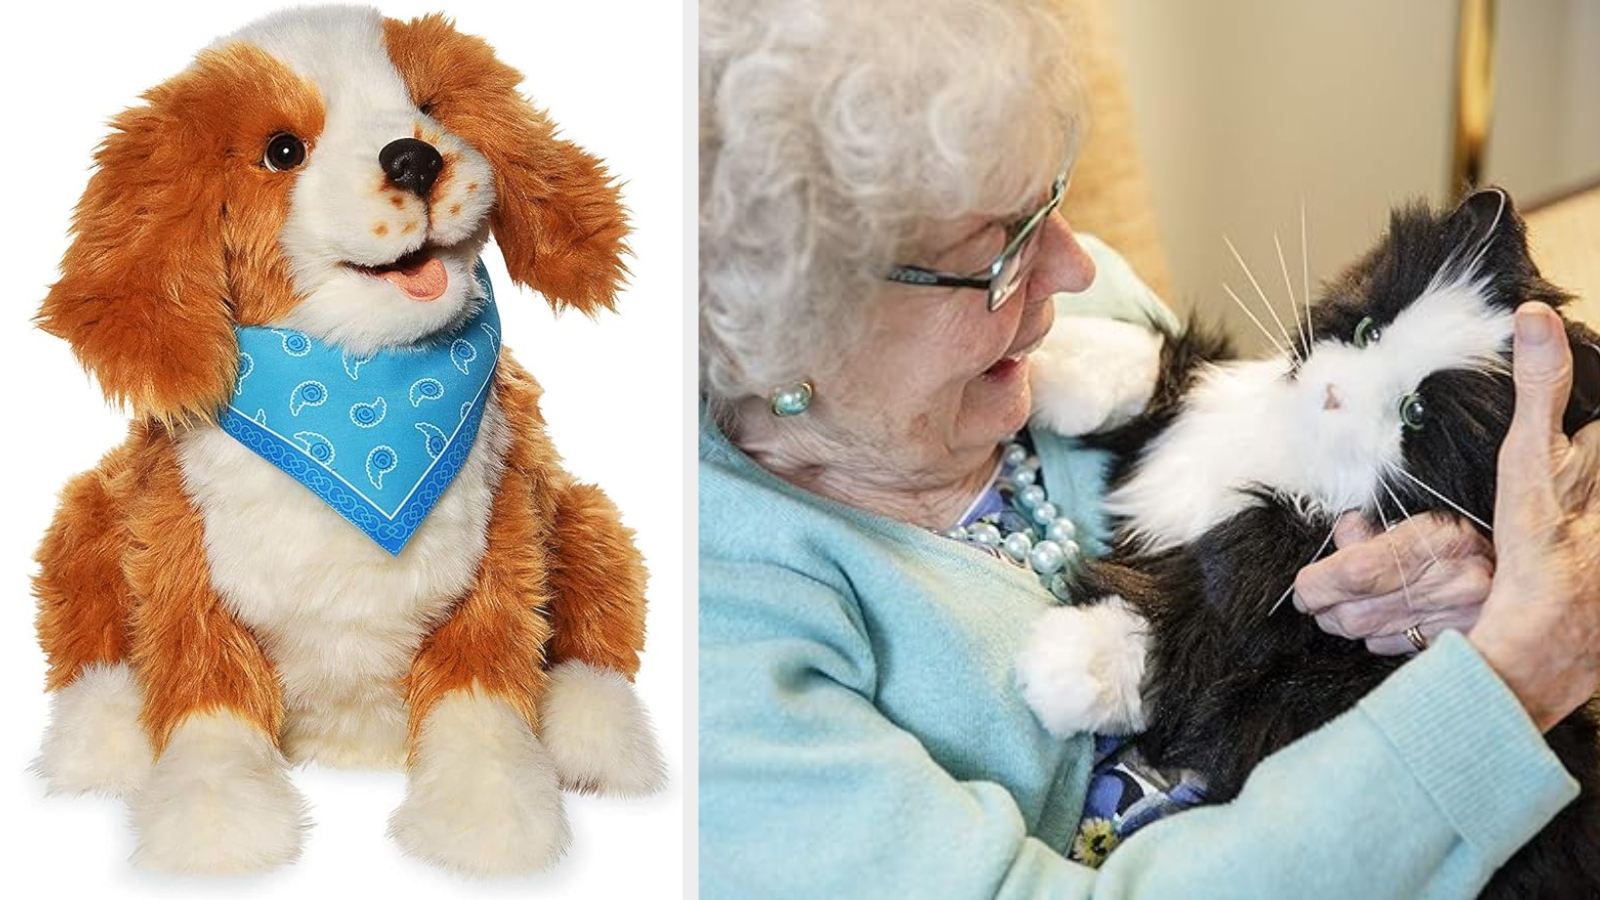 A photo collage showing a stuffed animal of a puppy and an elderly person wearing glasses holding a stuffed animal of a cat